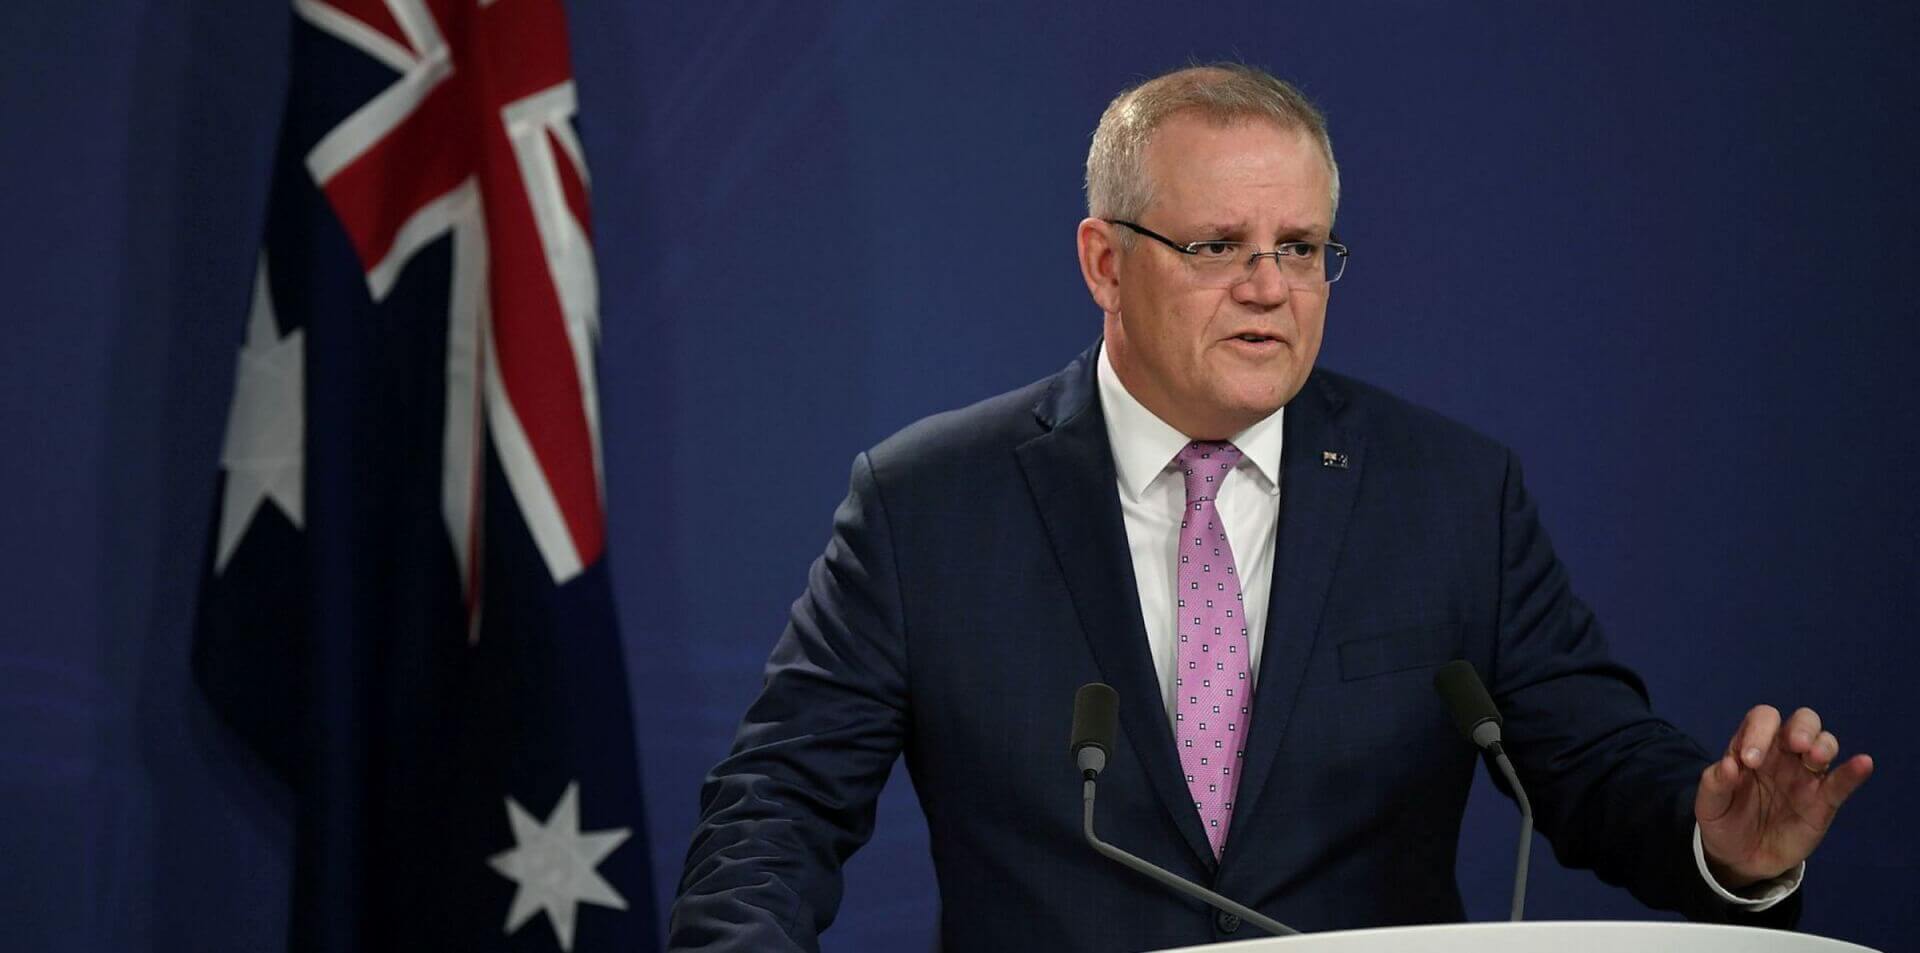 PM Morrison Says Australia’s Climate Strategy and Targets Will be a “Sovereign Decision”